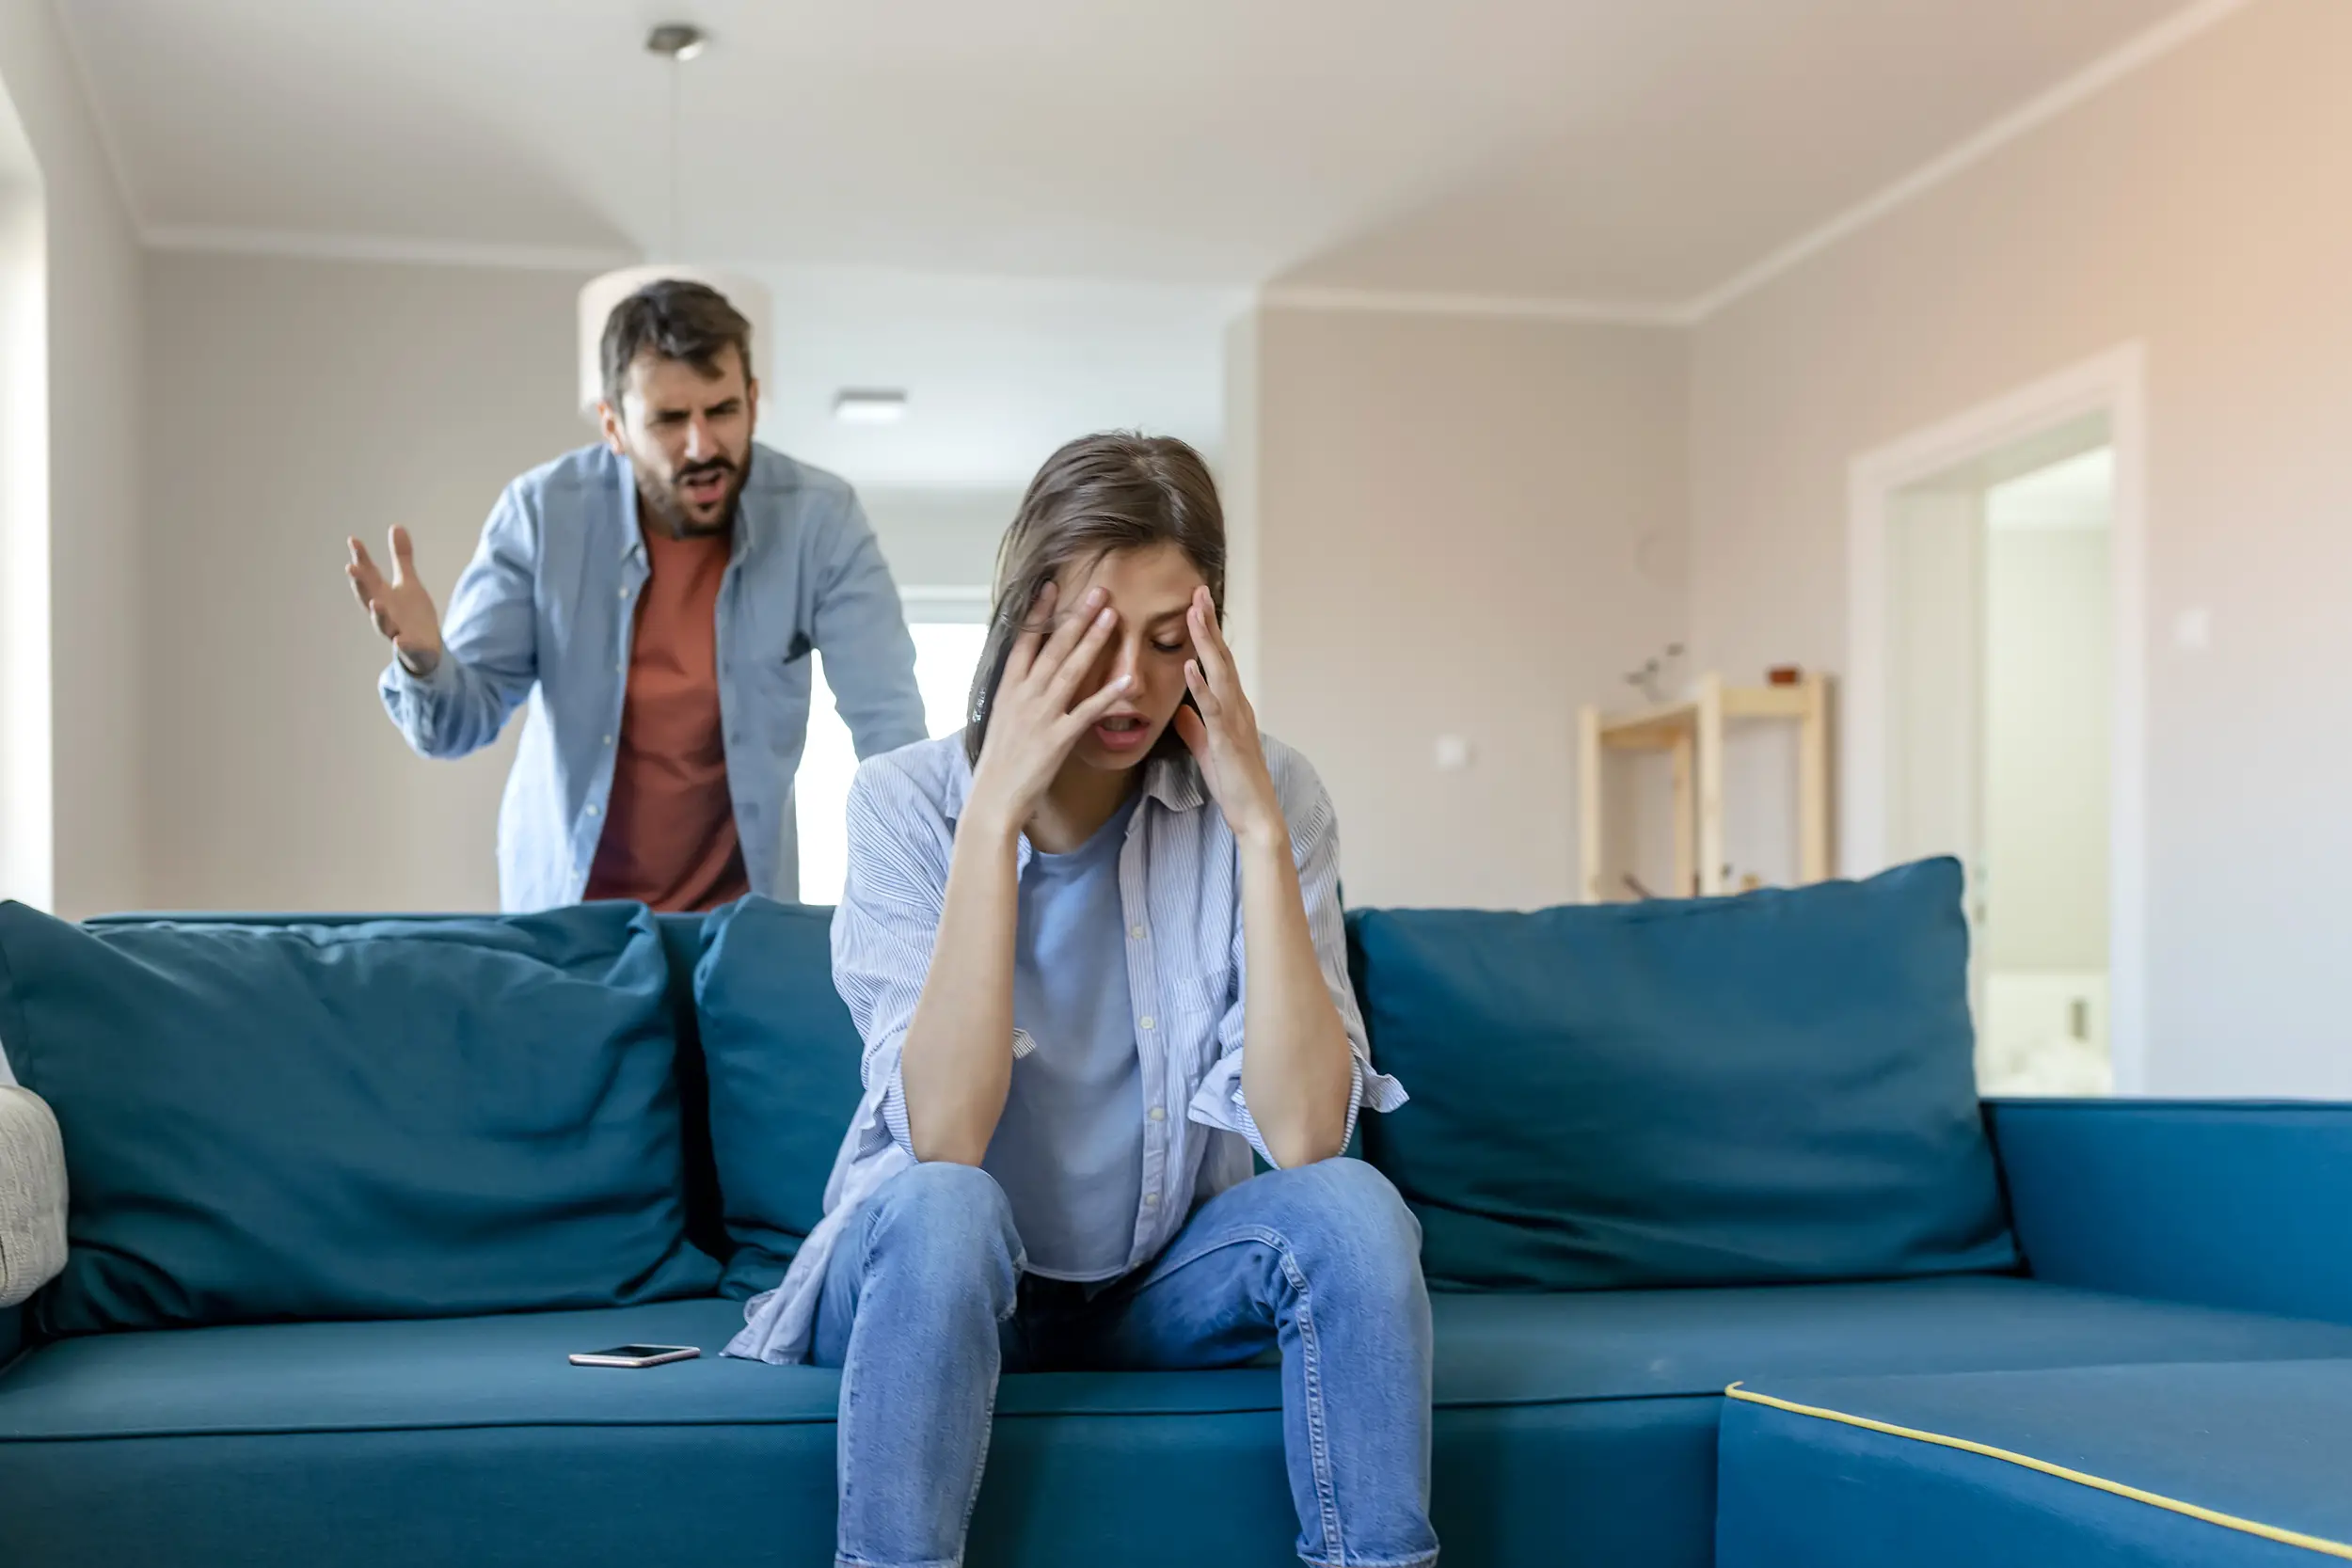 How to deal with brother-in-law living with you